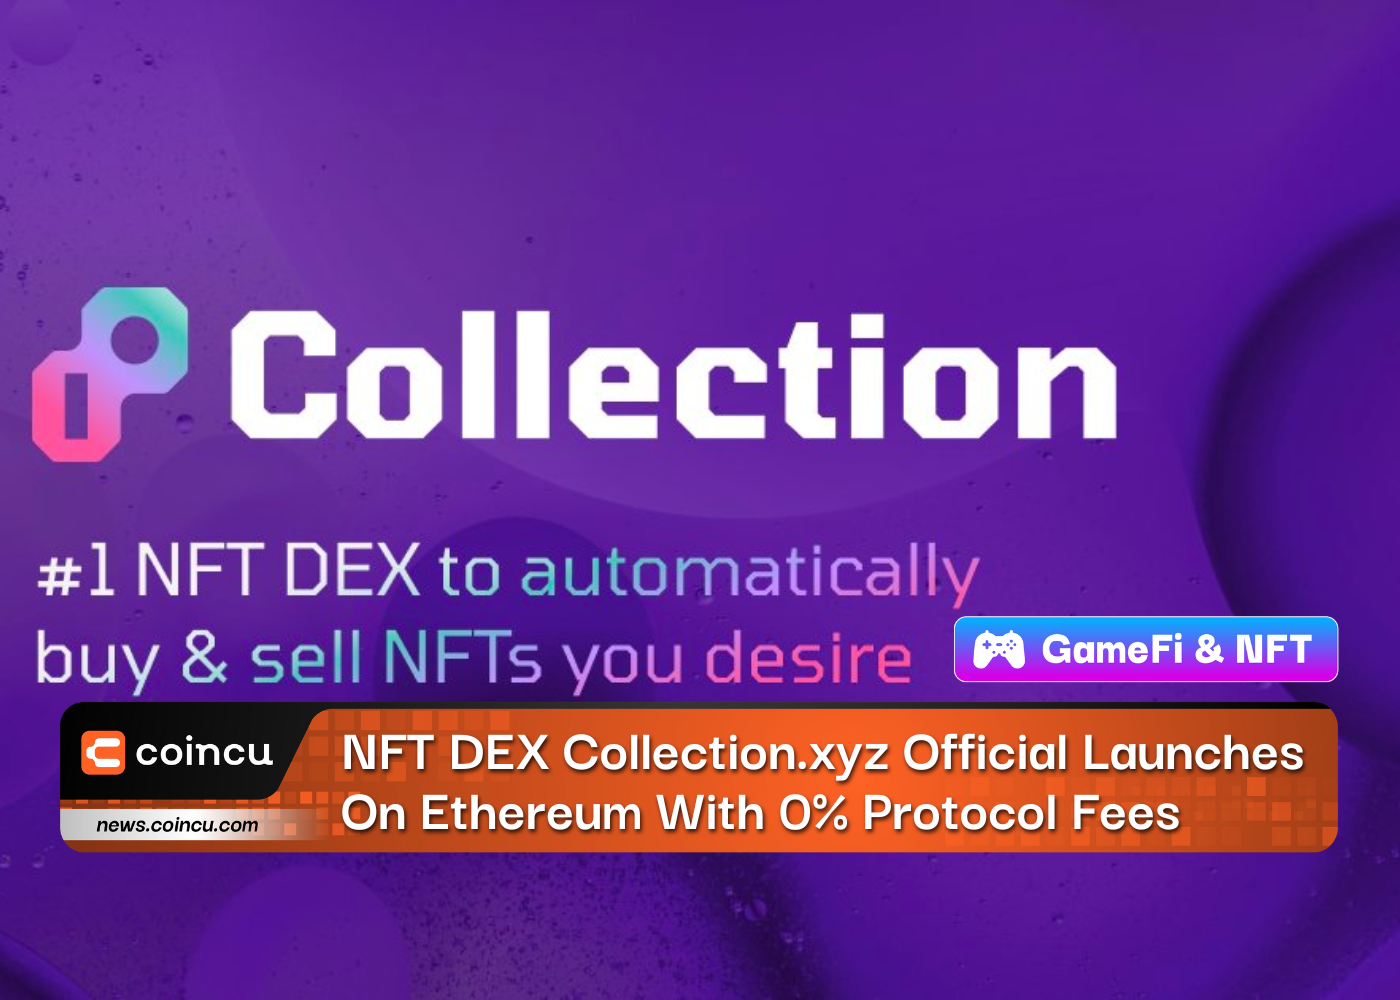 NFT DEX Collection.xyz Official Launches On Ethereum With 0% Protocol Fees